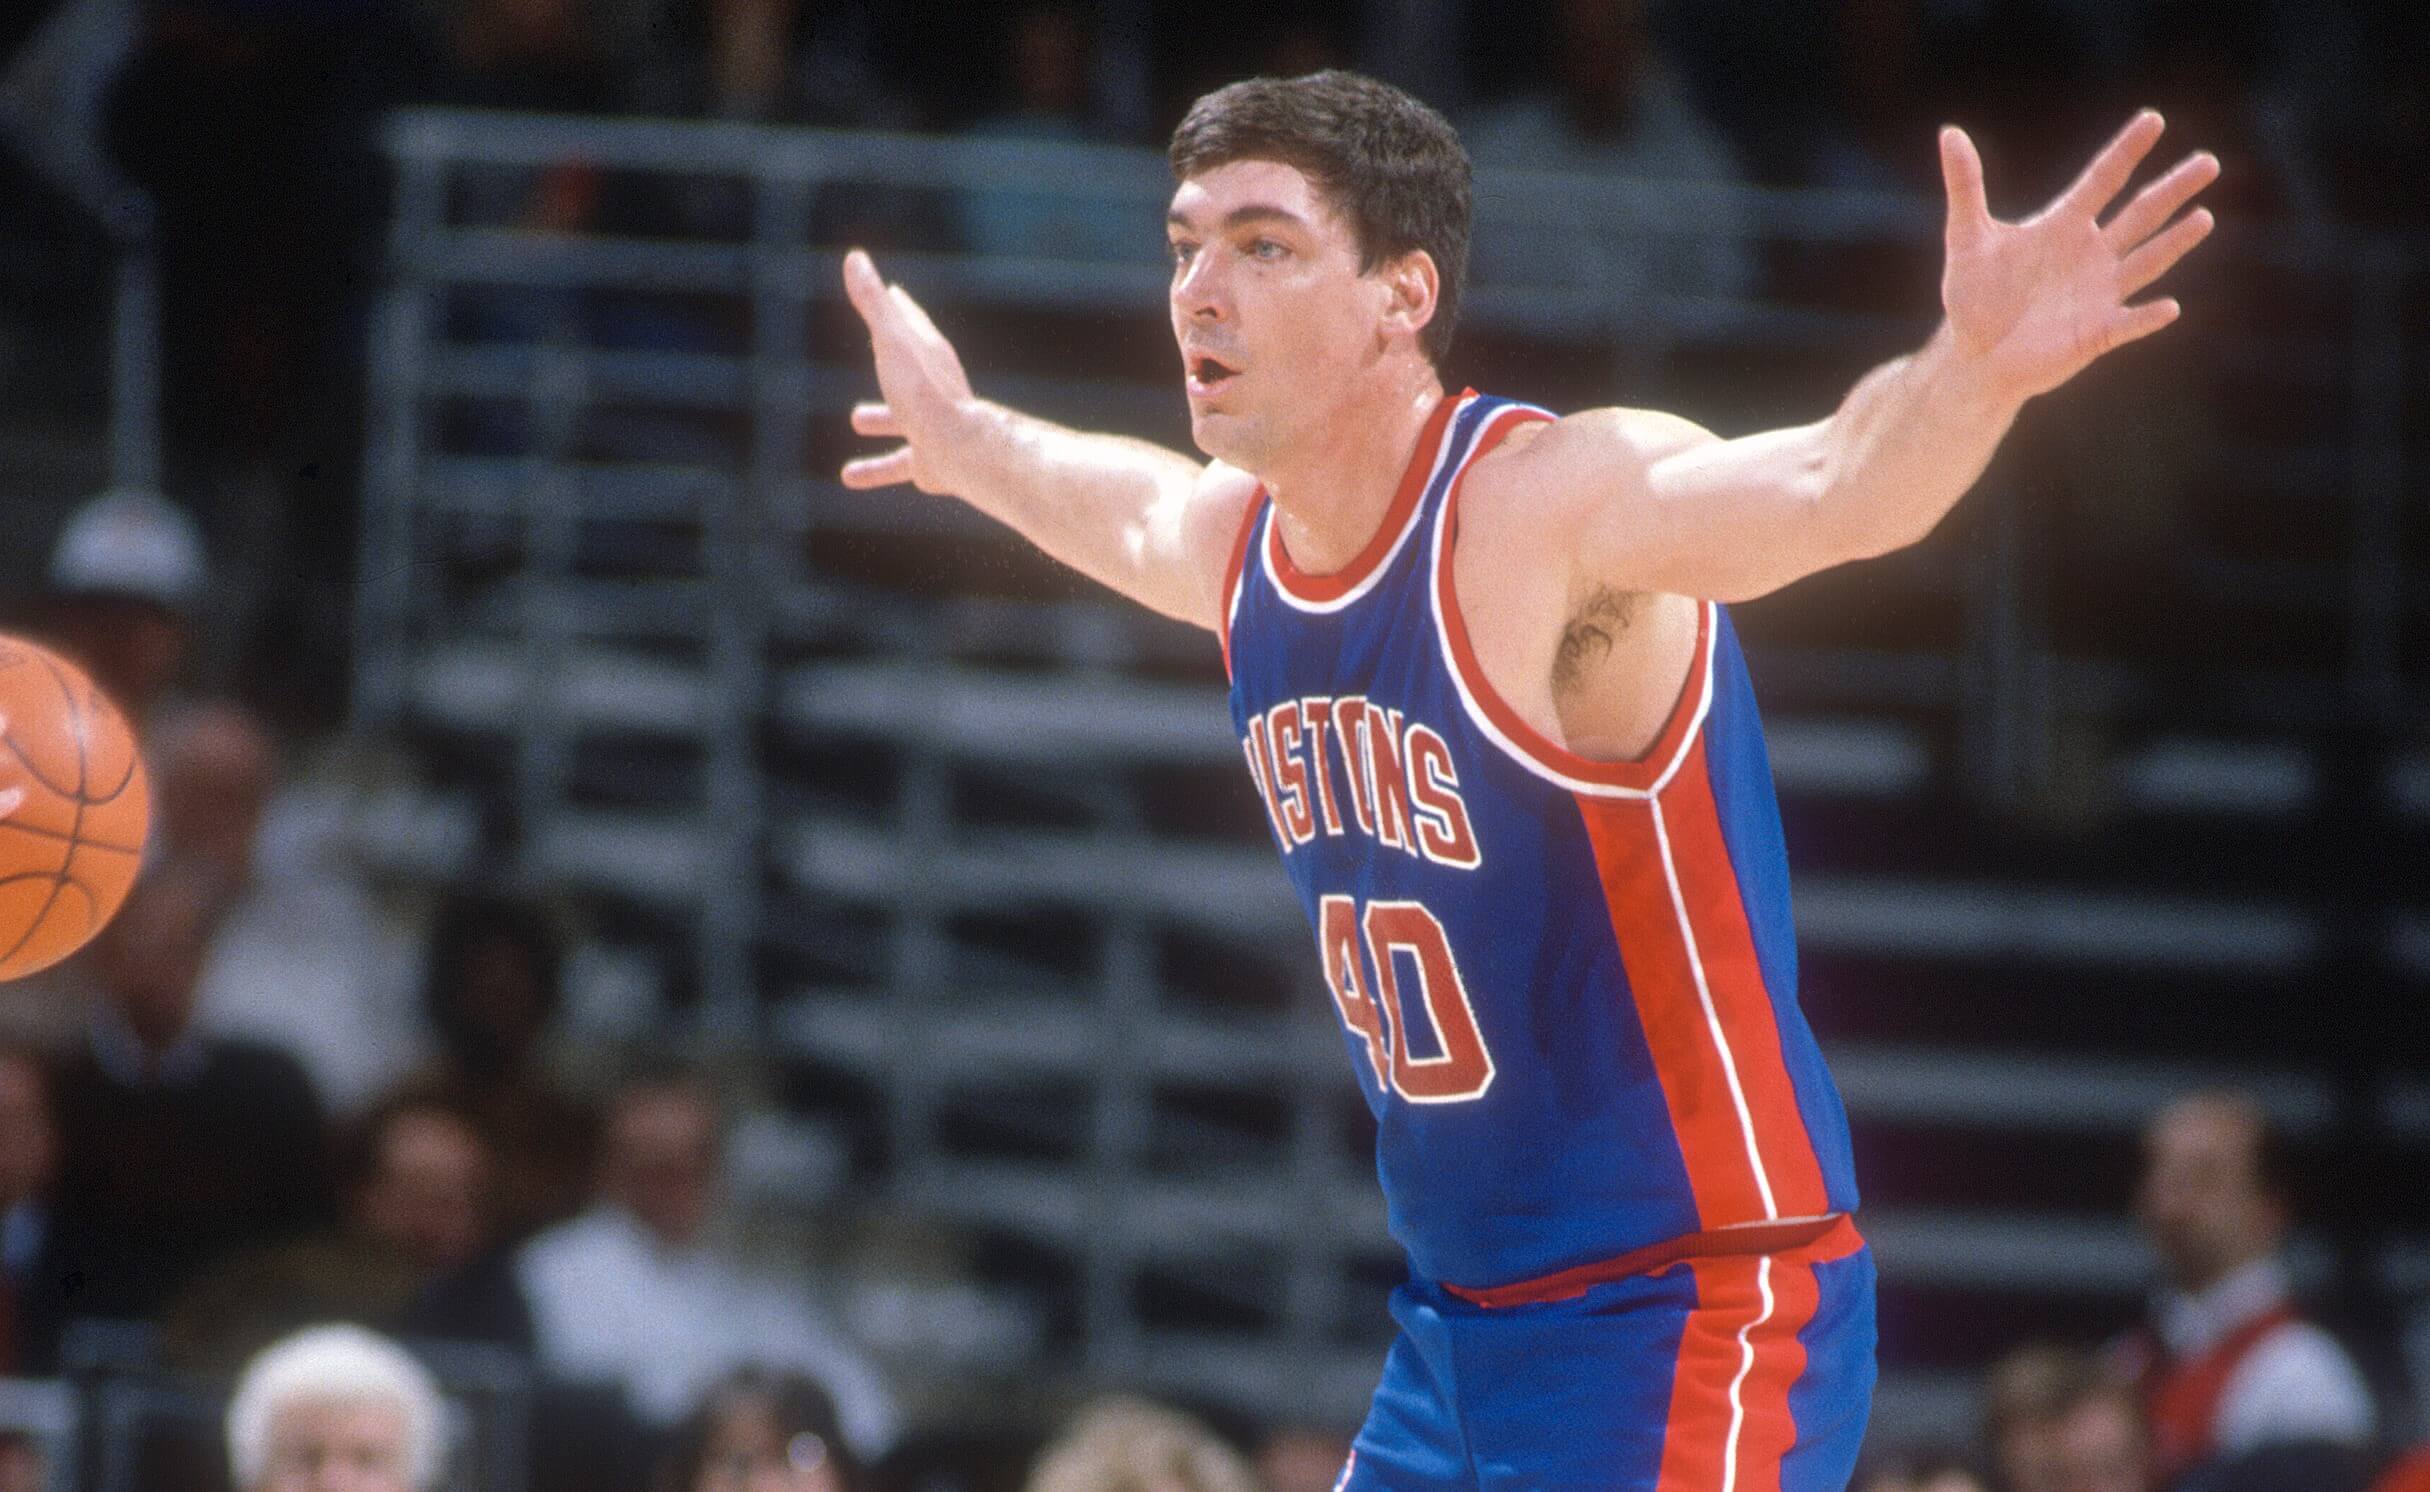 Isiah Thomas Explains Why no Detroit Pistons Players Assisted Bill Laimbeer After Robert Parish Decked Him